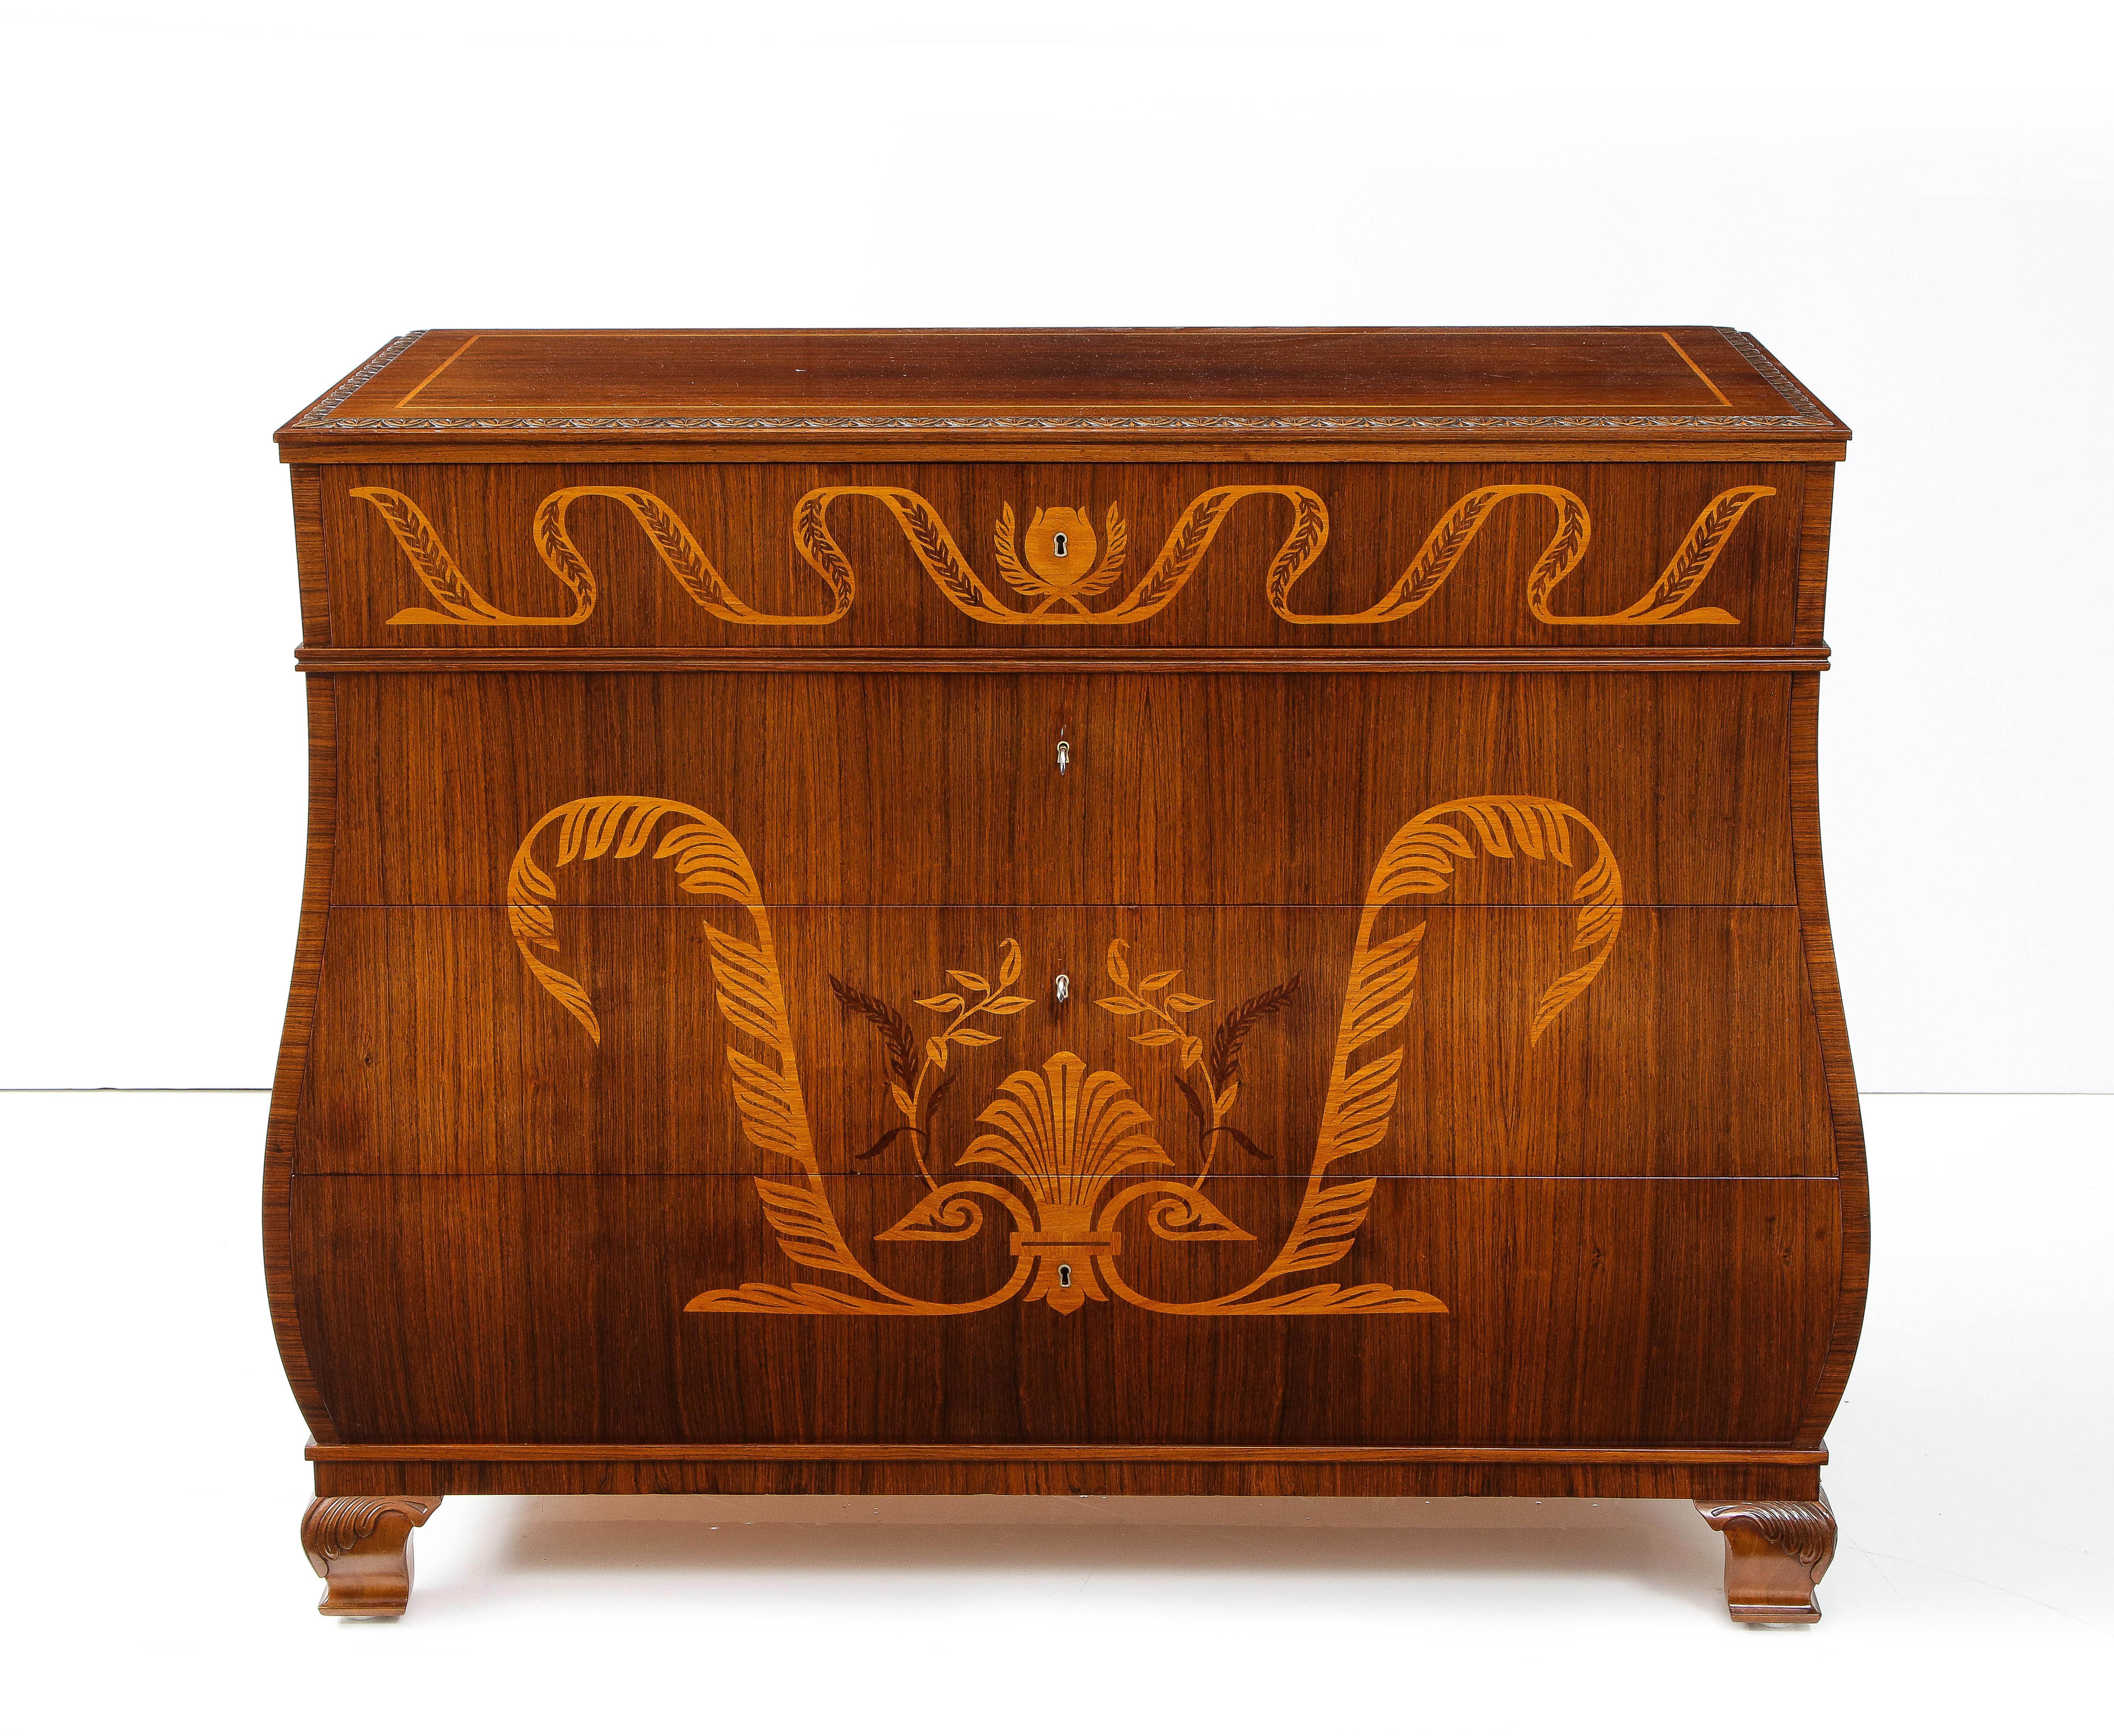 A fine Swedish Grace fruitwood inlaid rosewood chest of drawers, Circa 1930-40, the rectangular top with a leaf tip carved edge, the bombé form body with four shaped drawers elaborately inlaid with leaf and scroll fruitwood inlays. Raised on carved